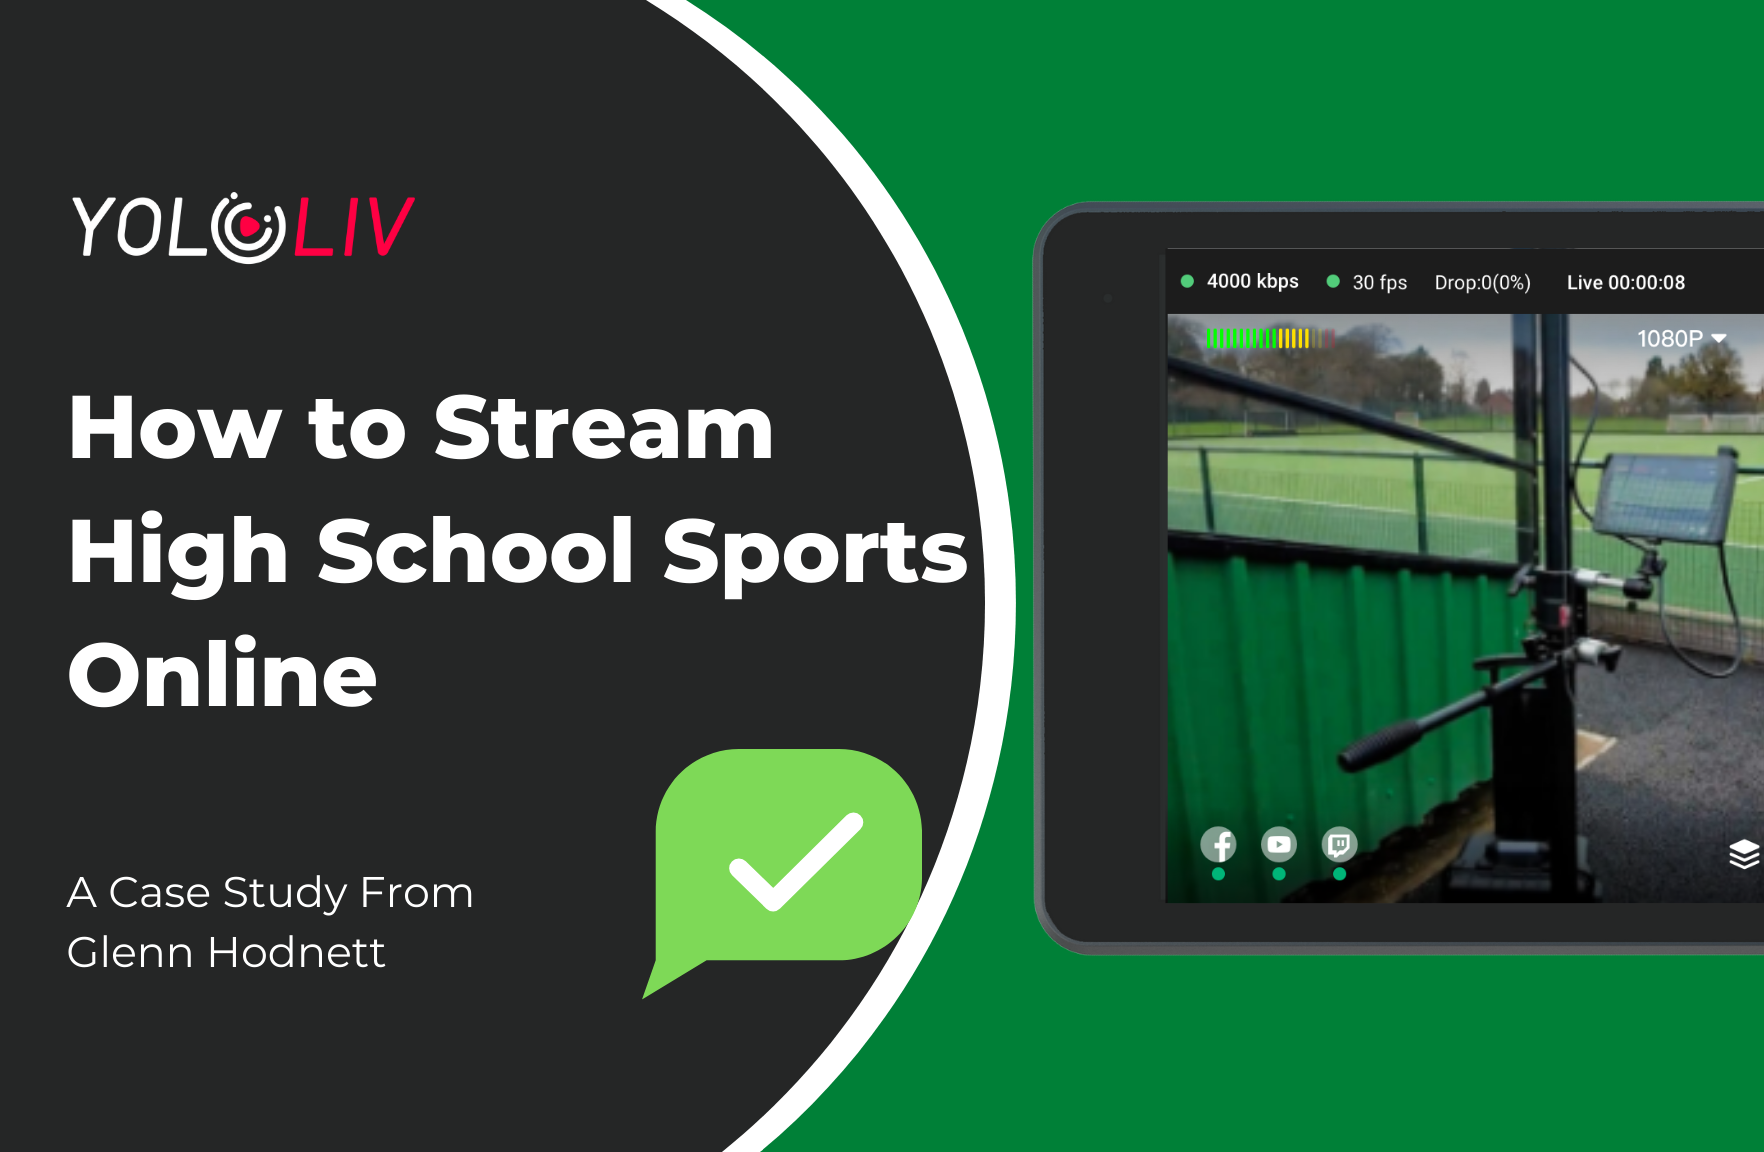 How to Stream High School Sports Online